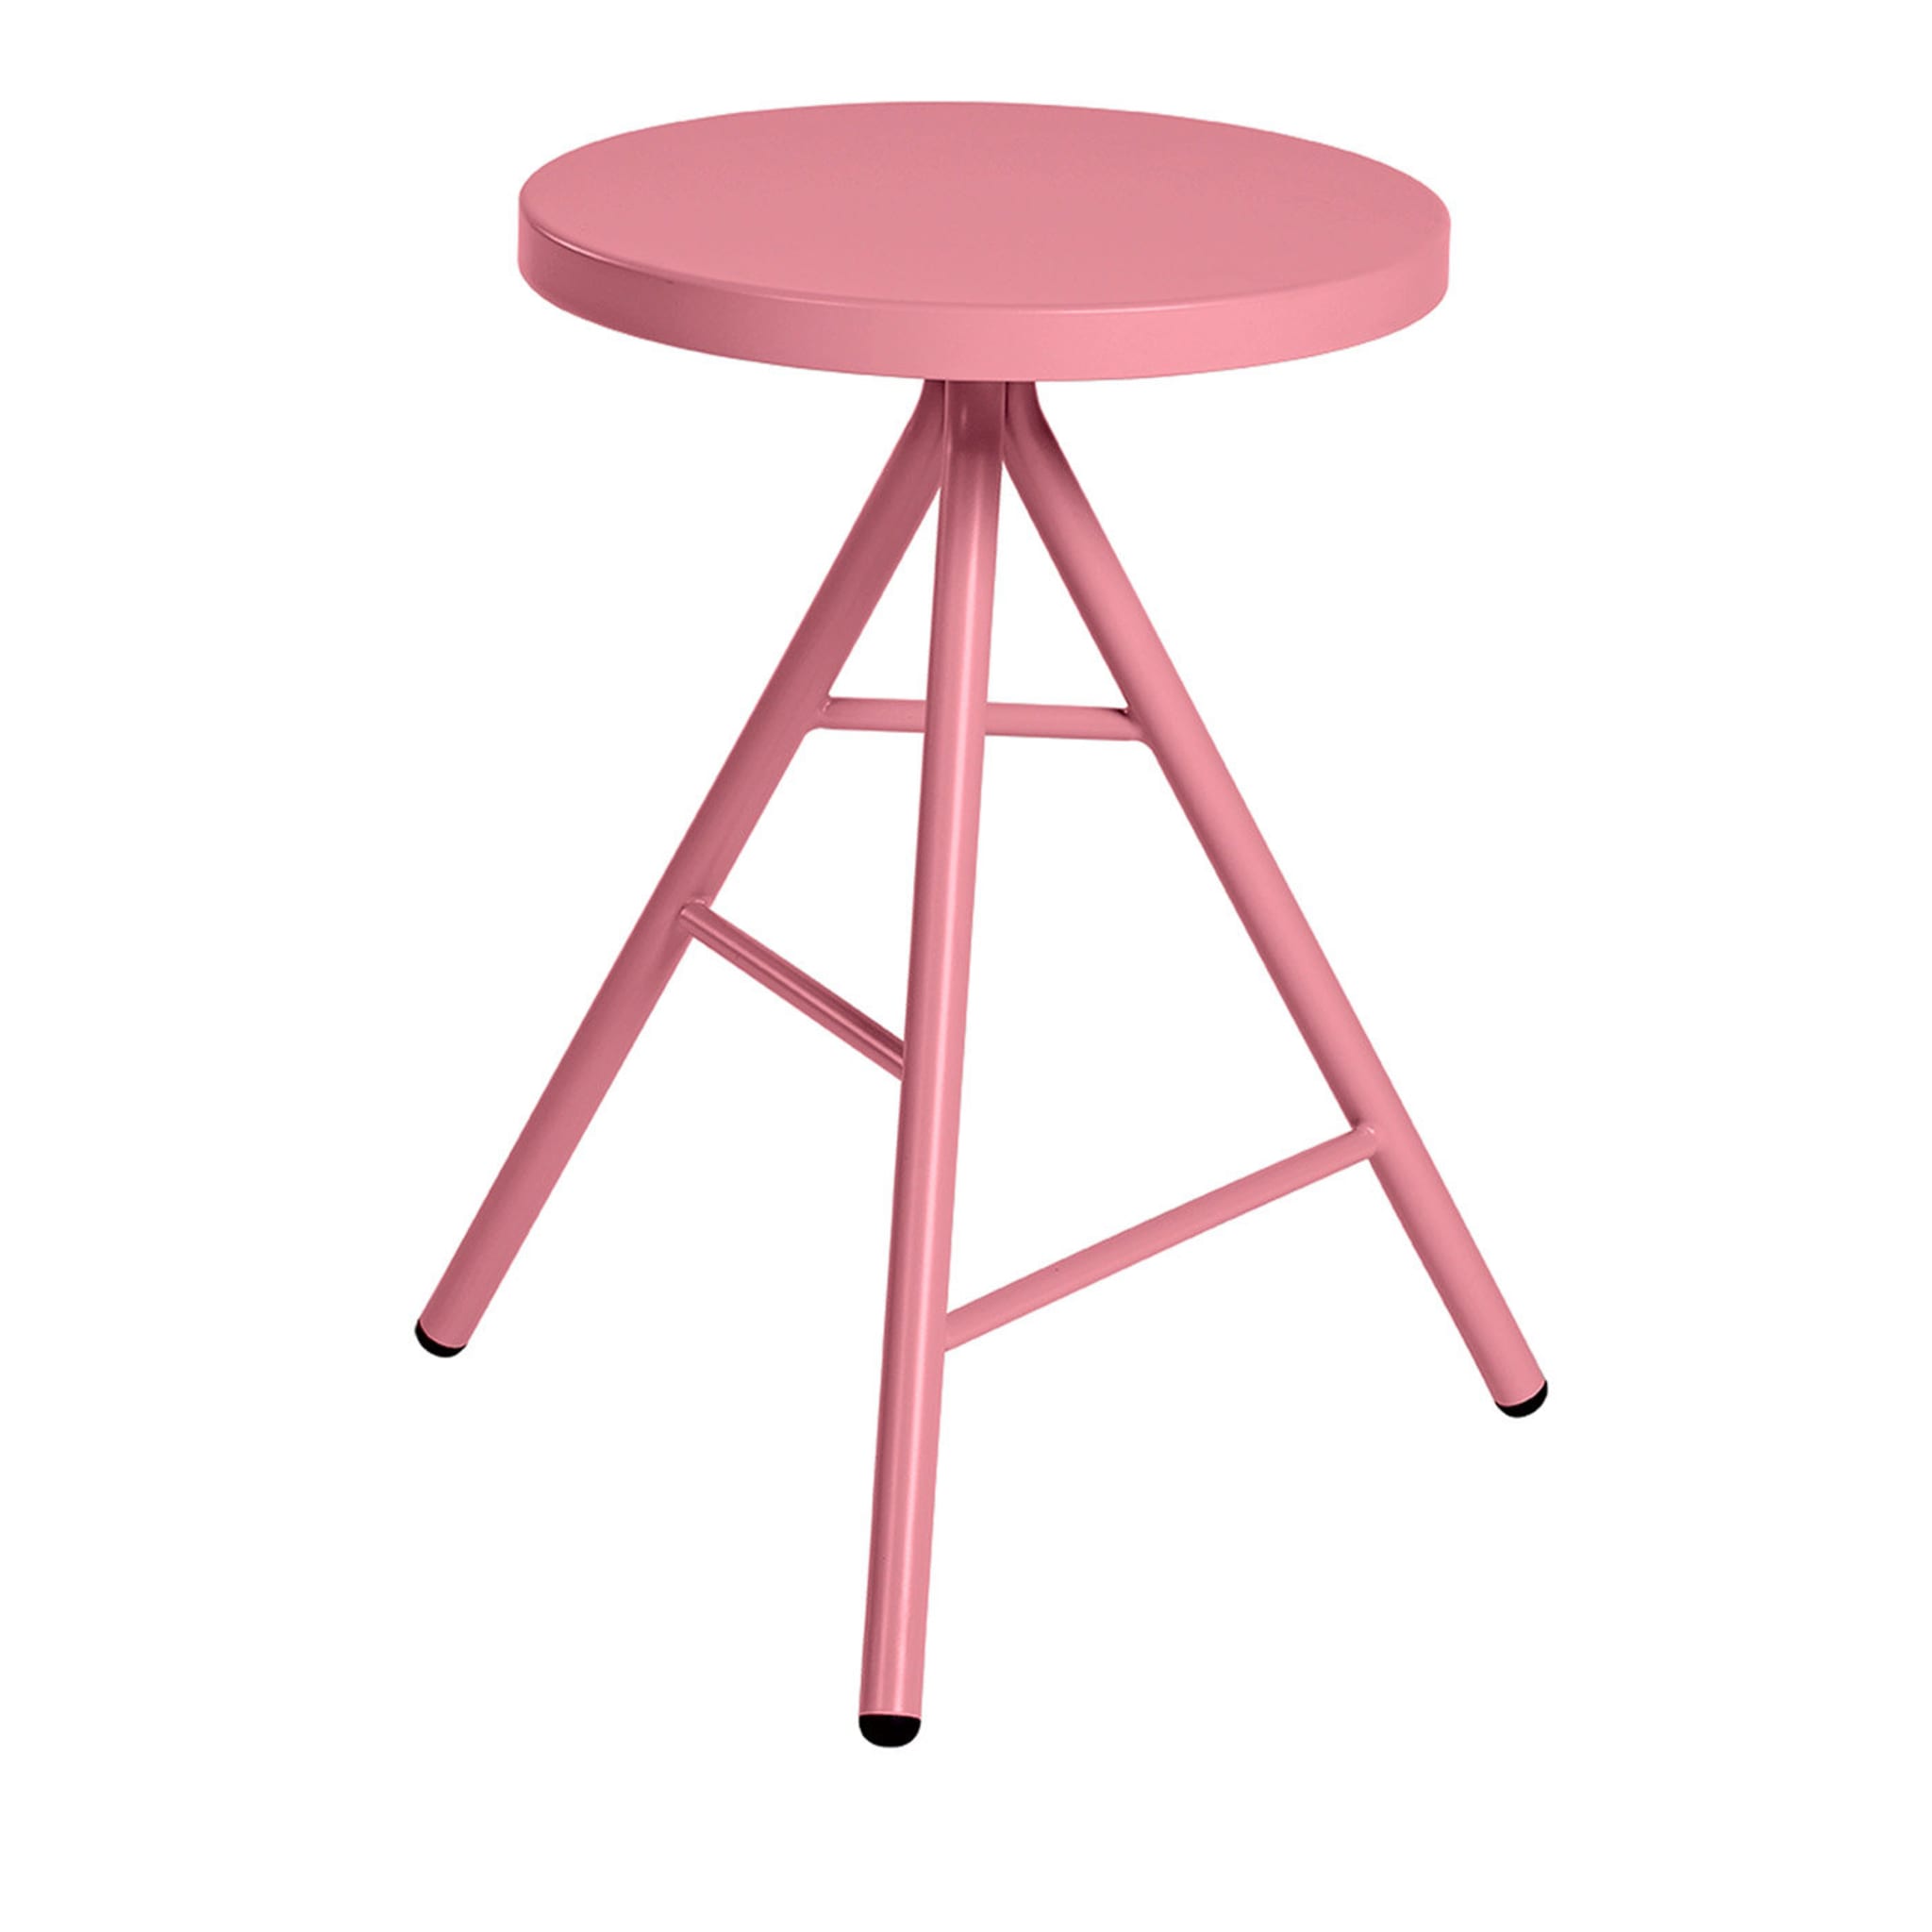 Symple Small Pink Stool - Main view